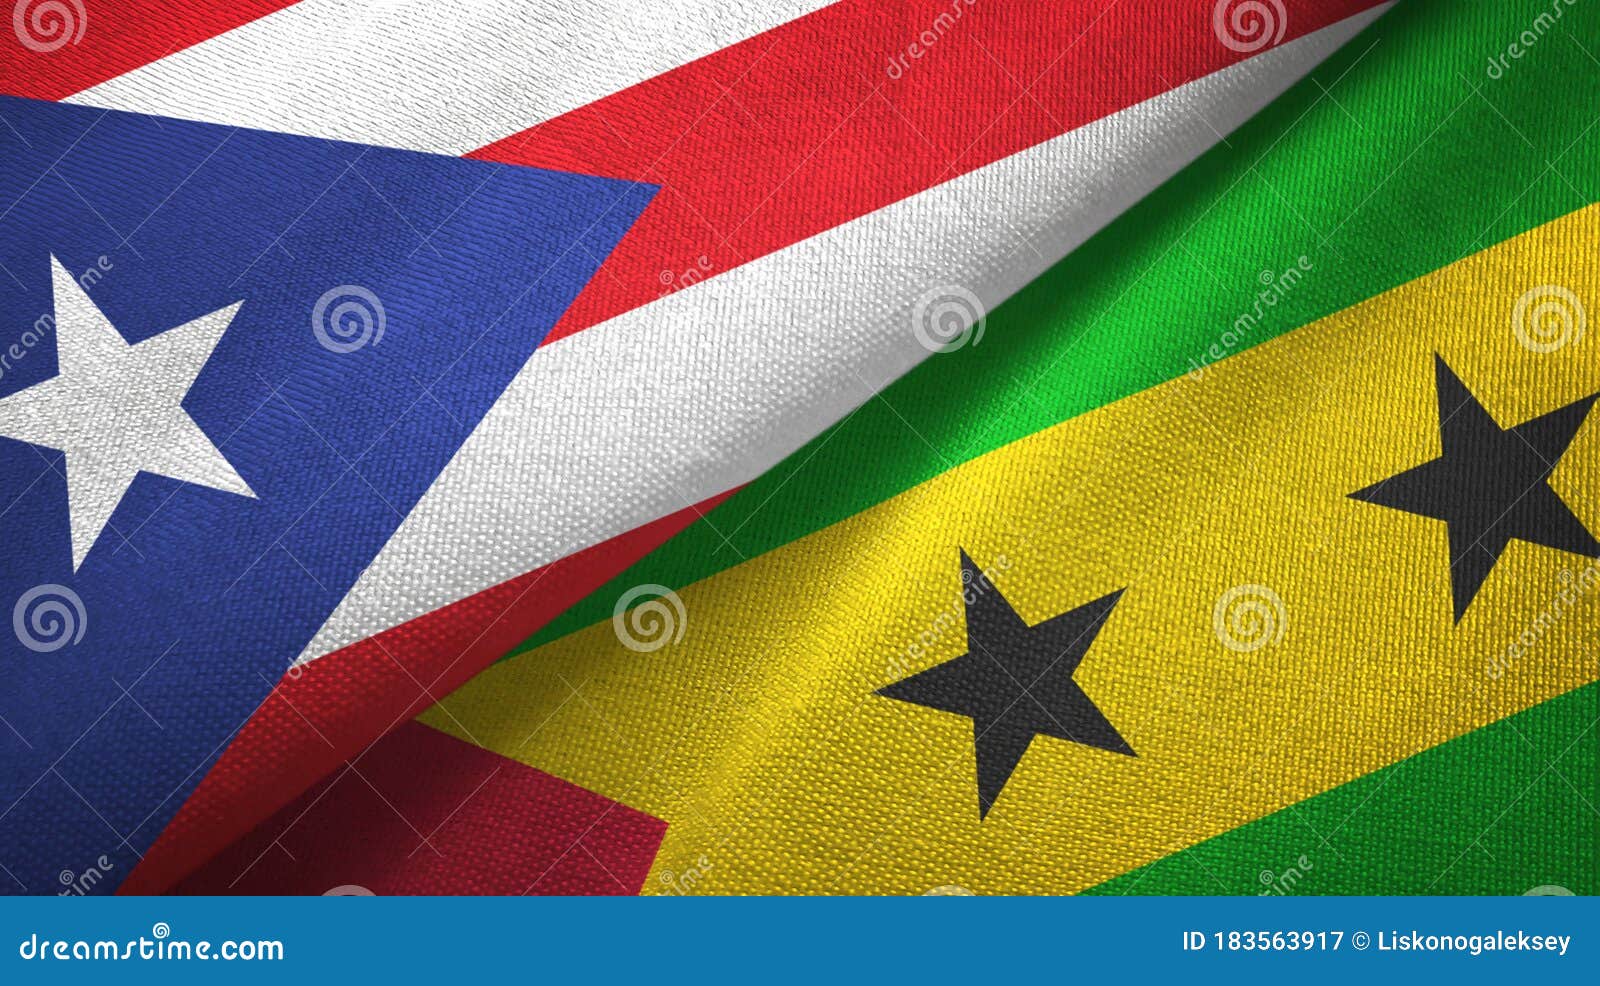 puerto rico and sao tome and principe two flags textile cloth, fabric texture